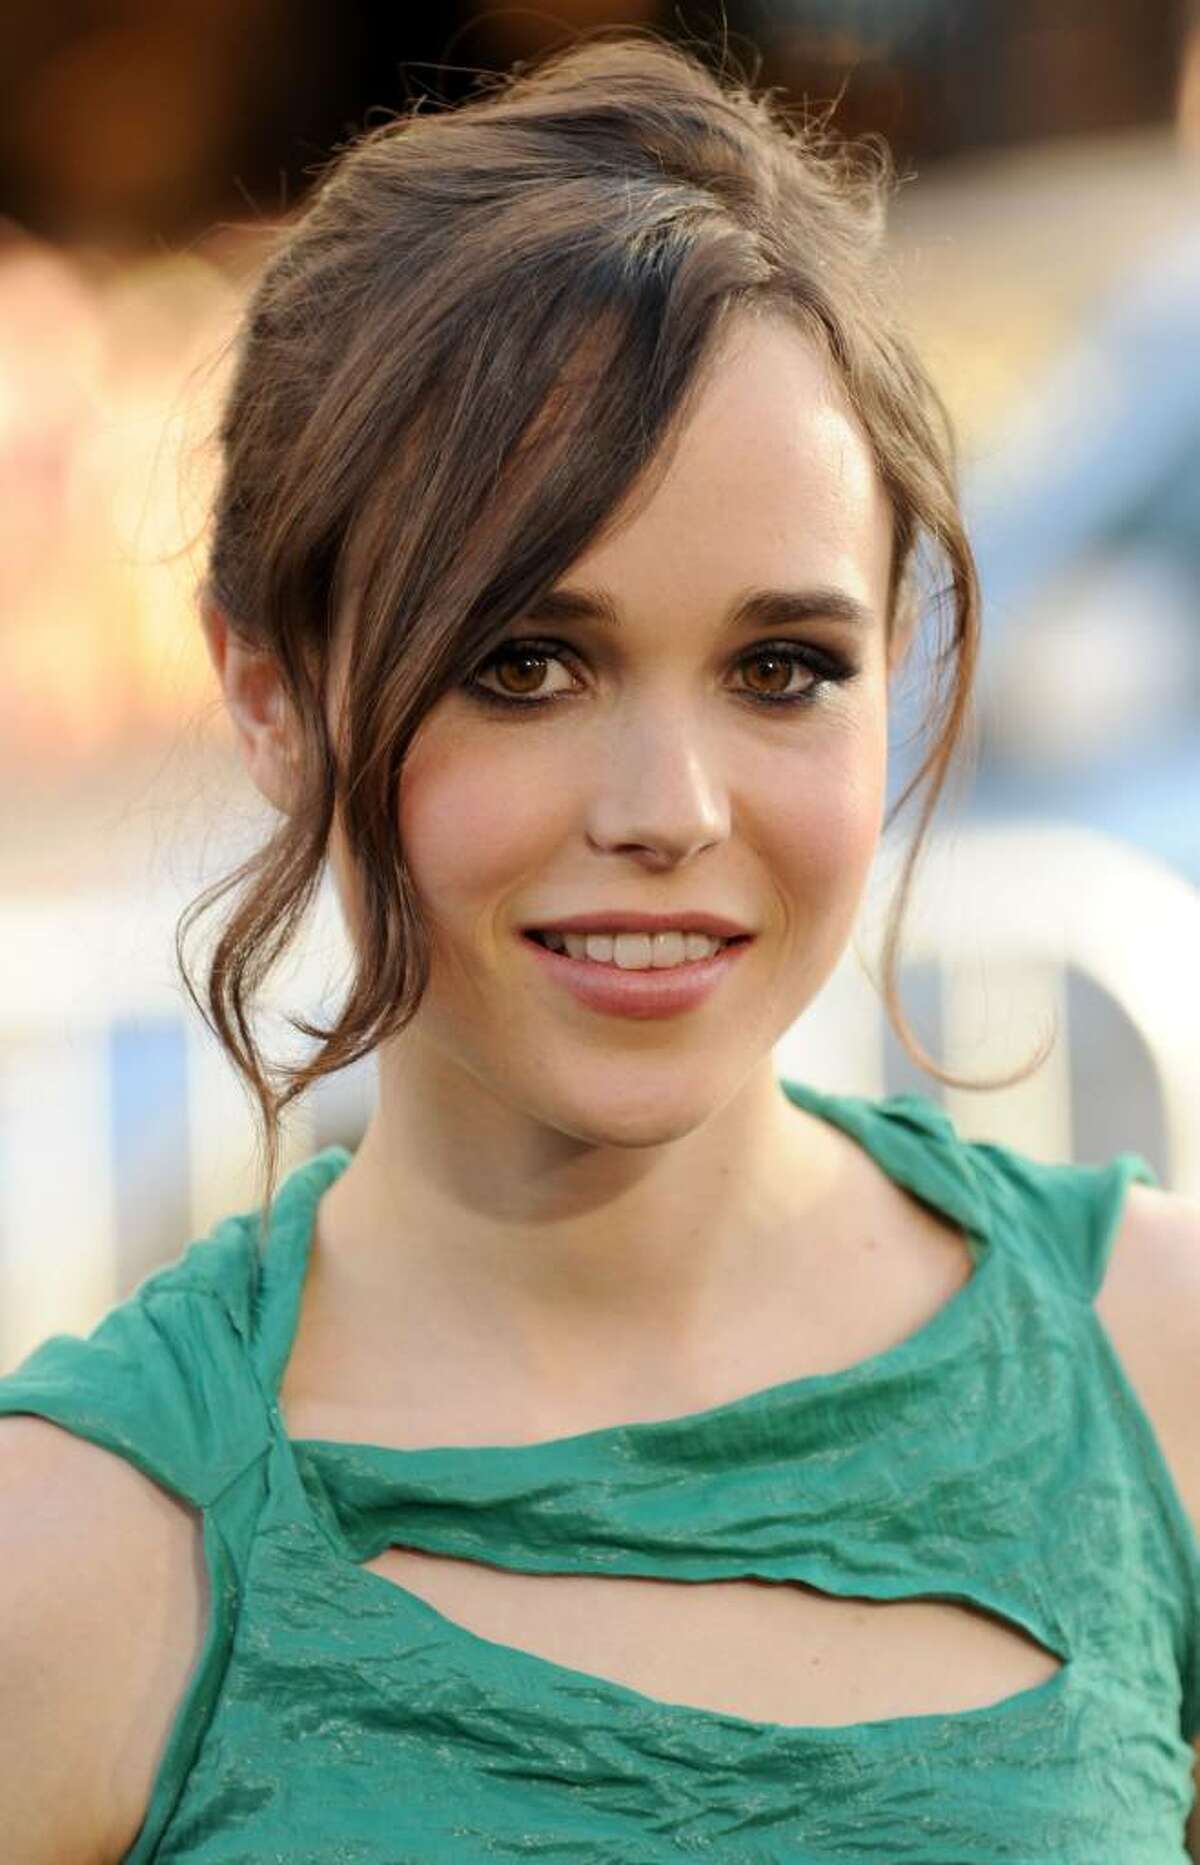 LOS ANGELES, CA - JULY 13: Actress Ellen Page arrives to premiere of Warner Bros. "Inception" at Grauman's Chinese Theatre on July 13, 2010 in Los Angeles, California. (Photo by Kevin Winter/Getty Images) *** Local Caption *** Ellen Page